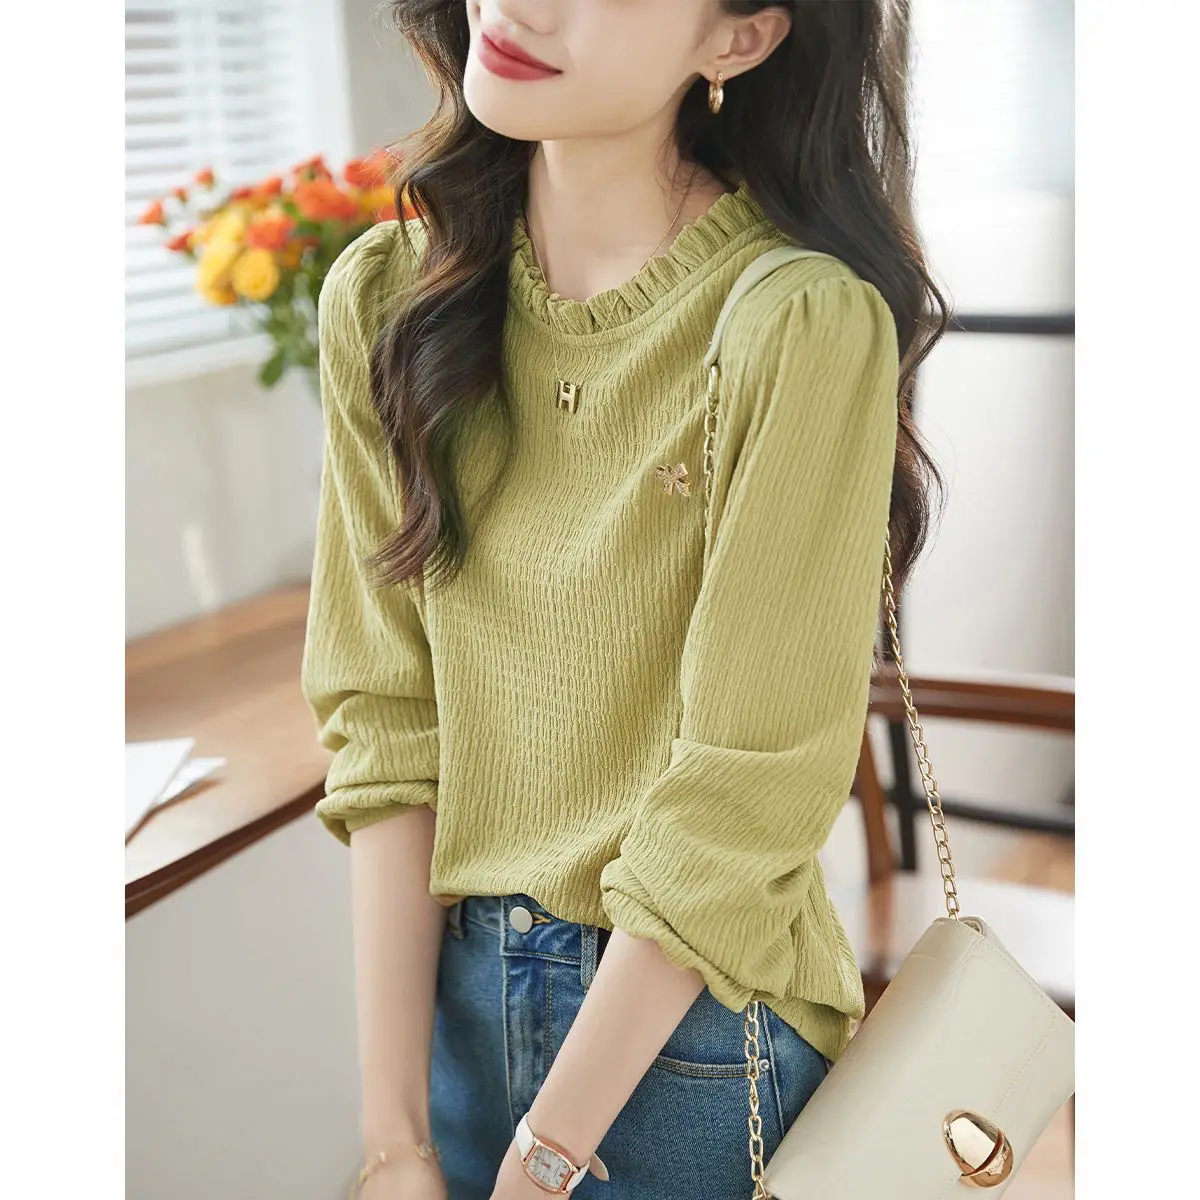 

O-Neck Agaric Lace Texture Fold Blended French Yellowish Cyan T-Shirts Spring Summer Loose Metal Brooch Design Women Fairycore